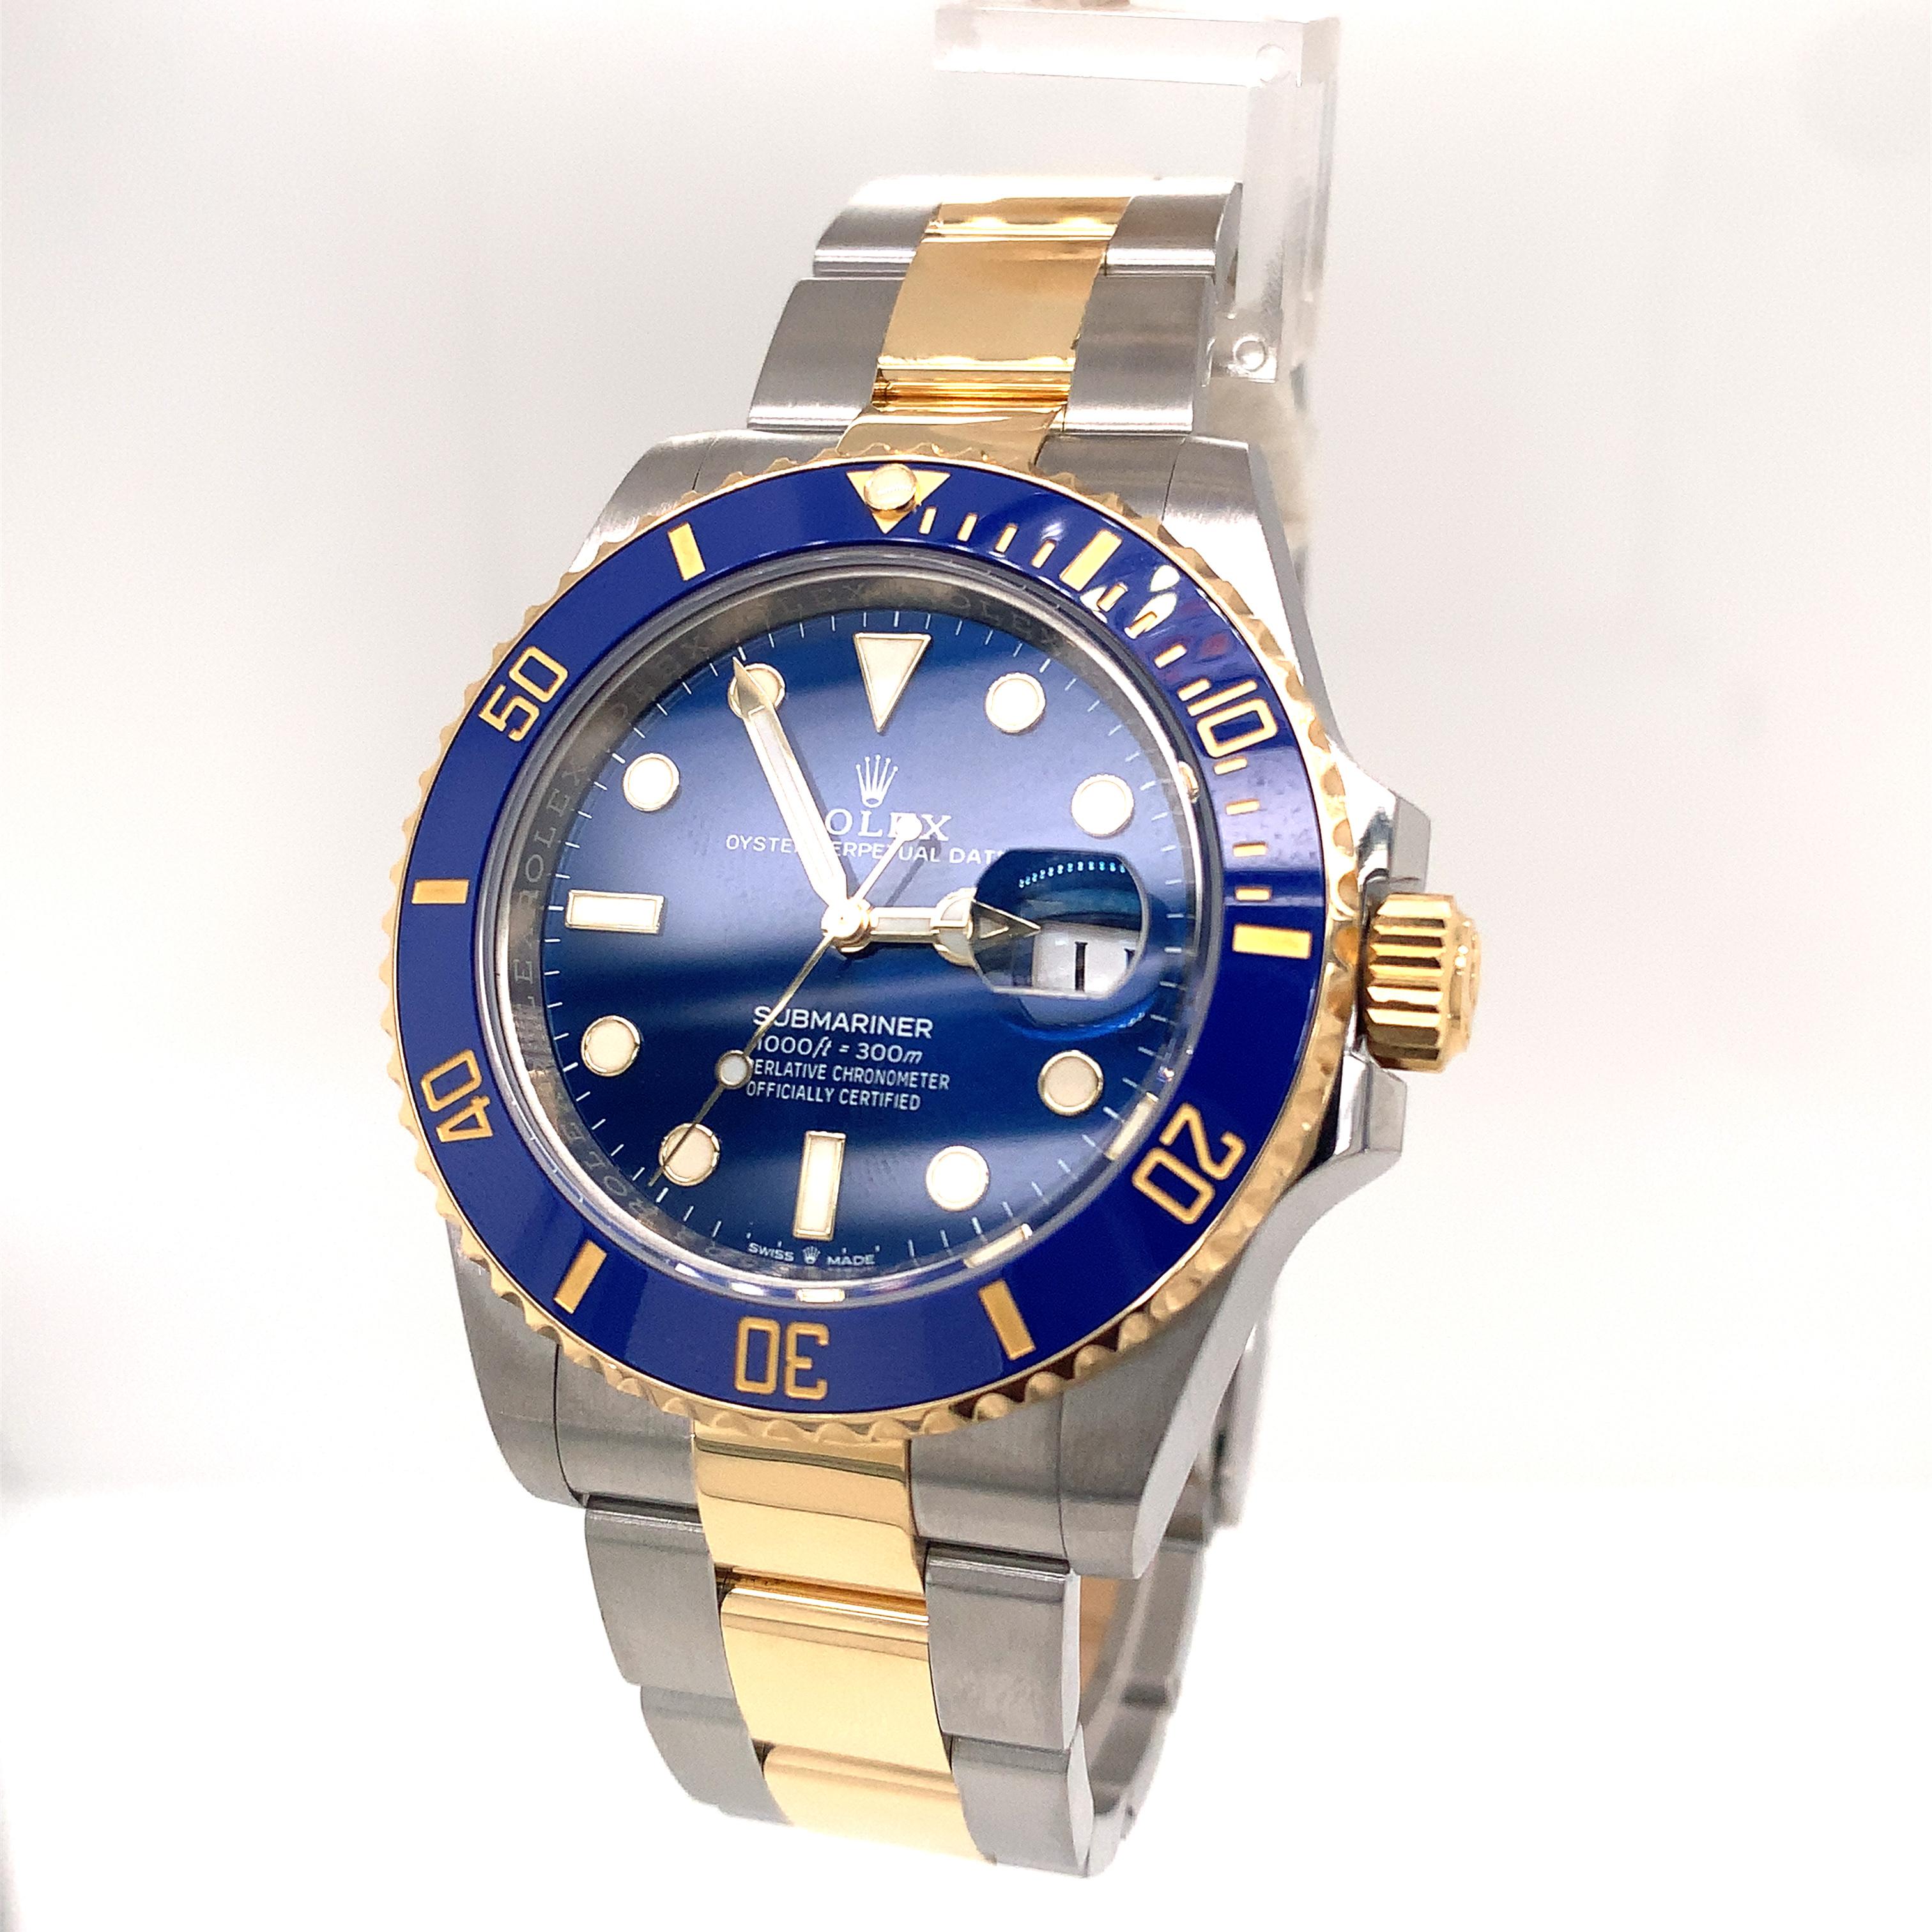 41mm stainless steel case, 18K yellow gold unidirectional rotatable bezel with blue Cerachrom disc, blue dial, and stainless steel and 18K yellow gold Oyster bracelet with Glidelock clasp. Water resistant to 300 meters (1000 feet). 
 Comes with